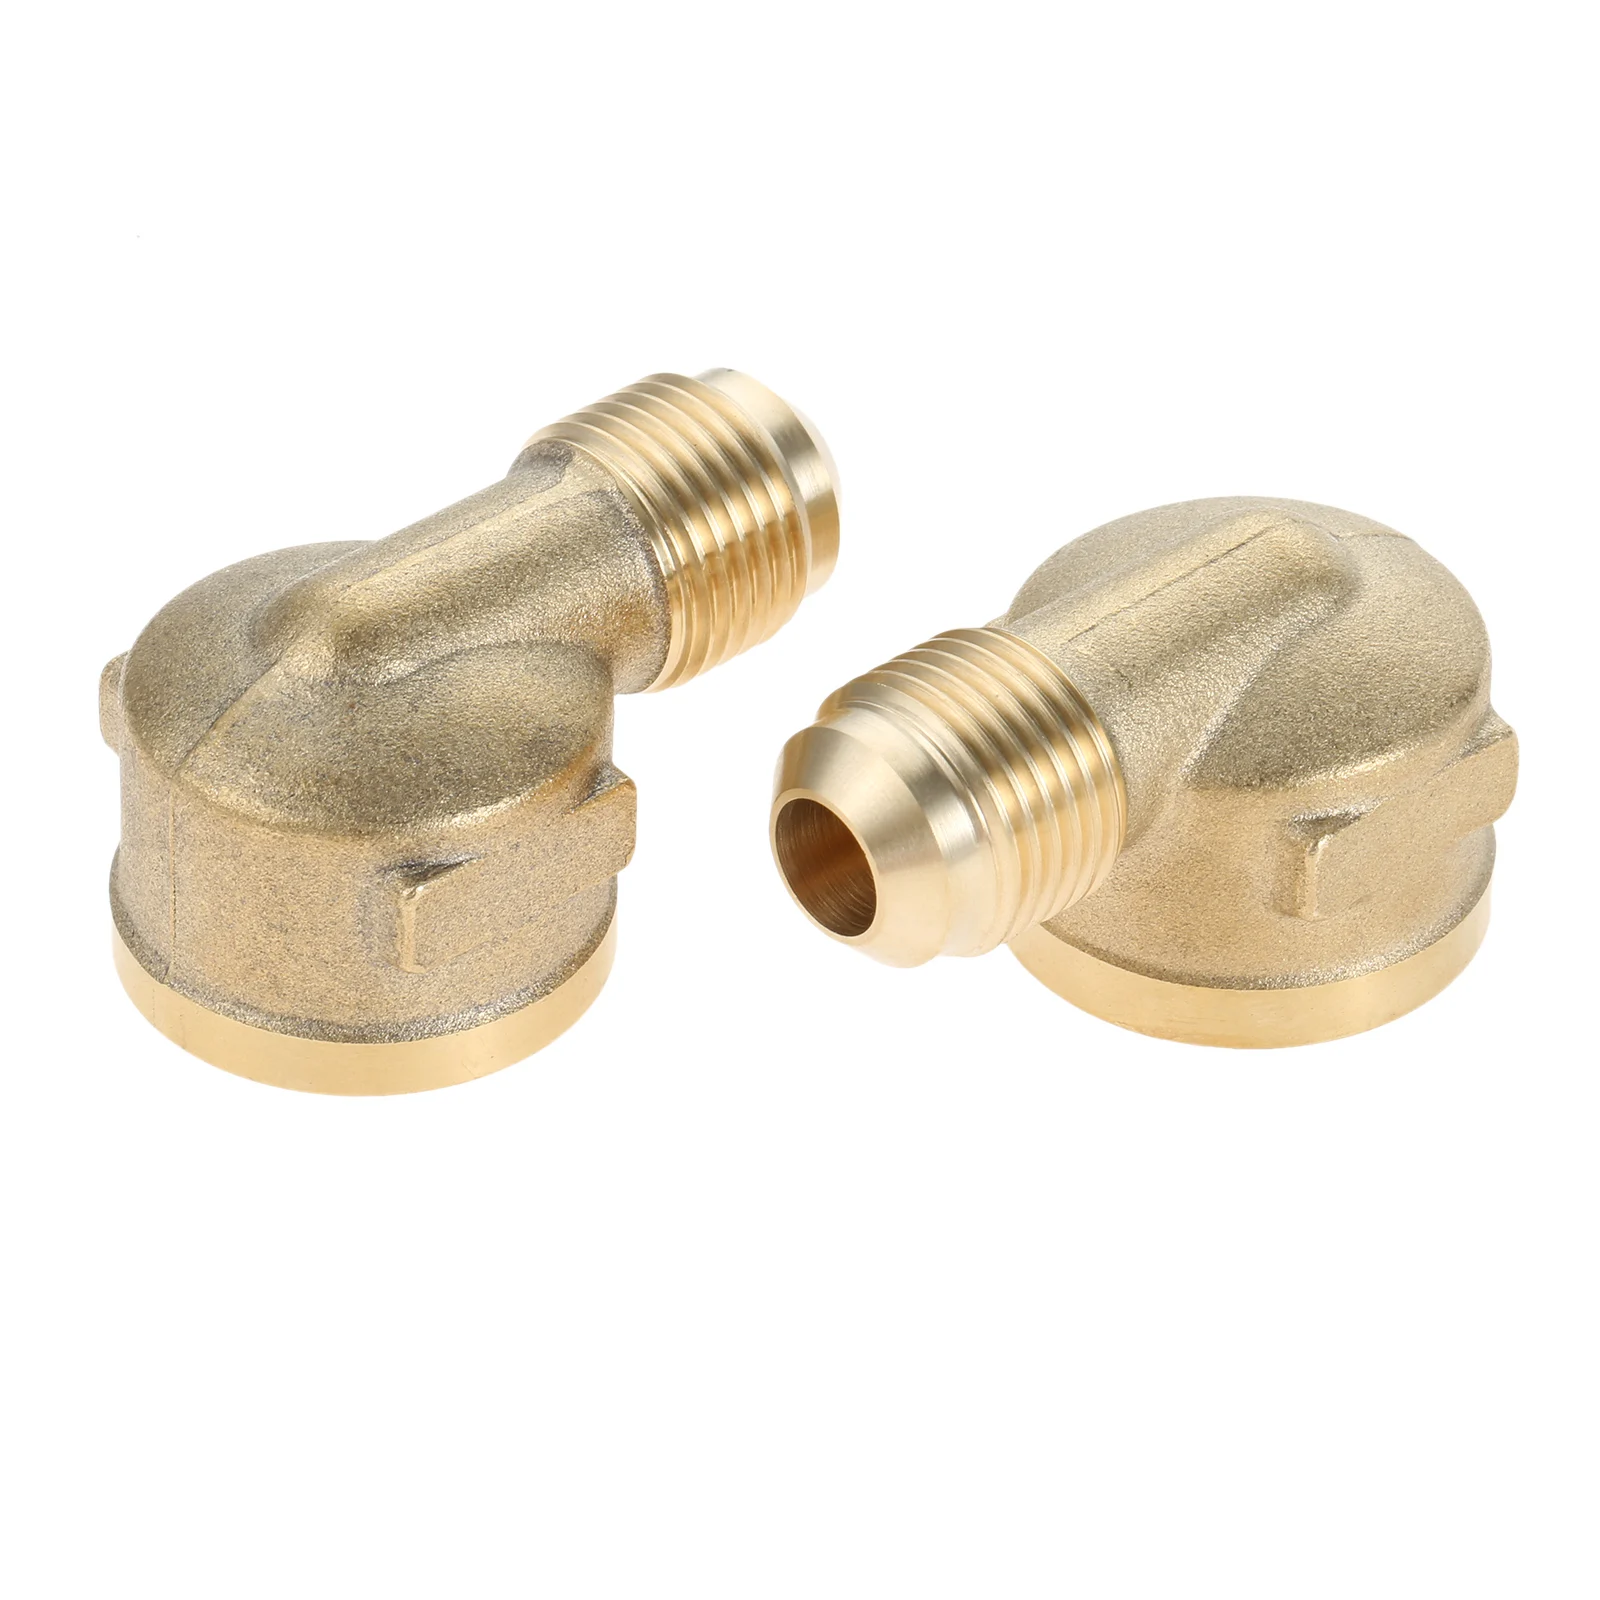 2PCS 90 Degree 1/2" Male NPT to 1/2" Male NPT Elbow Coupling Connector 